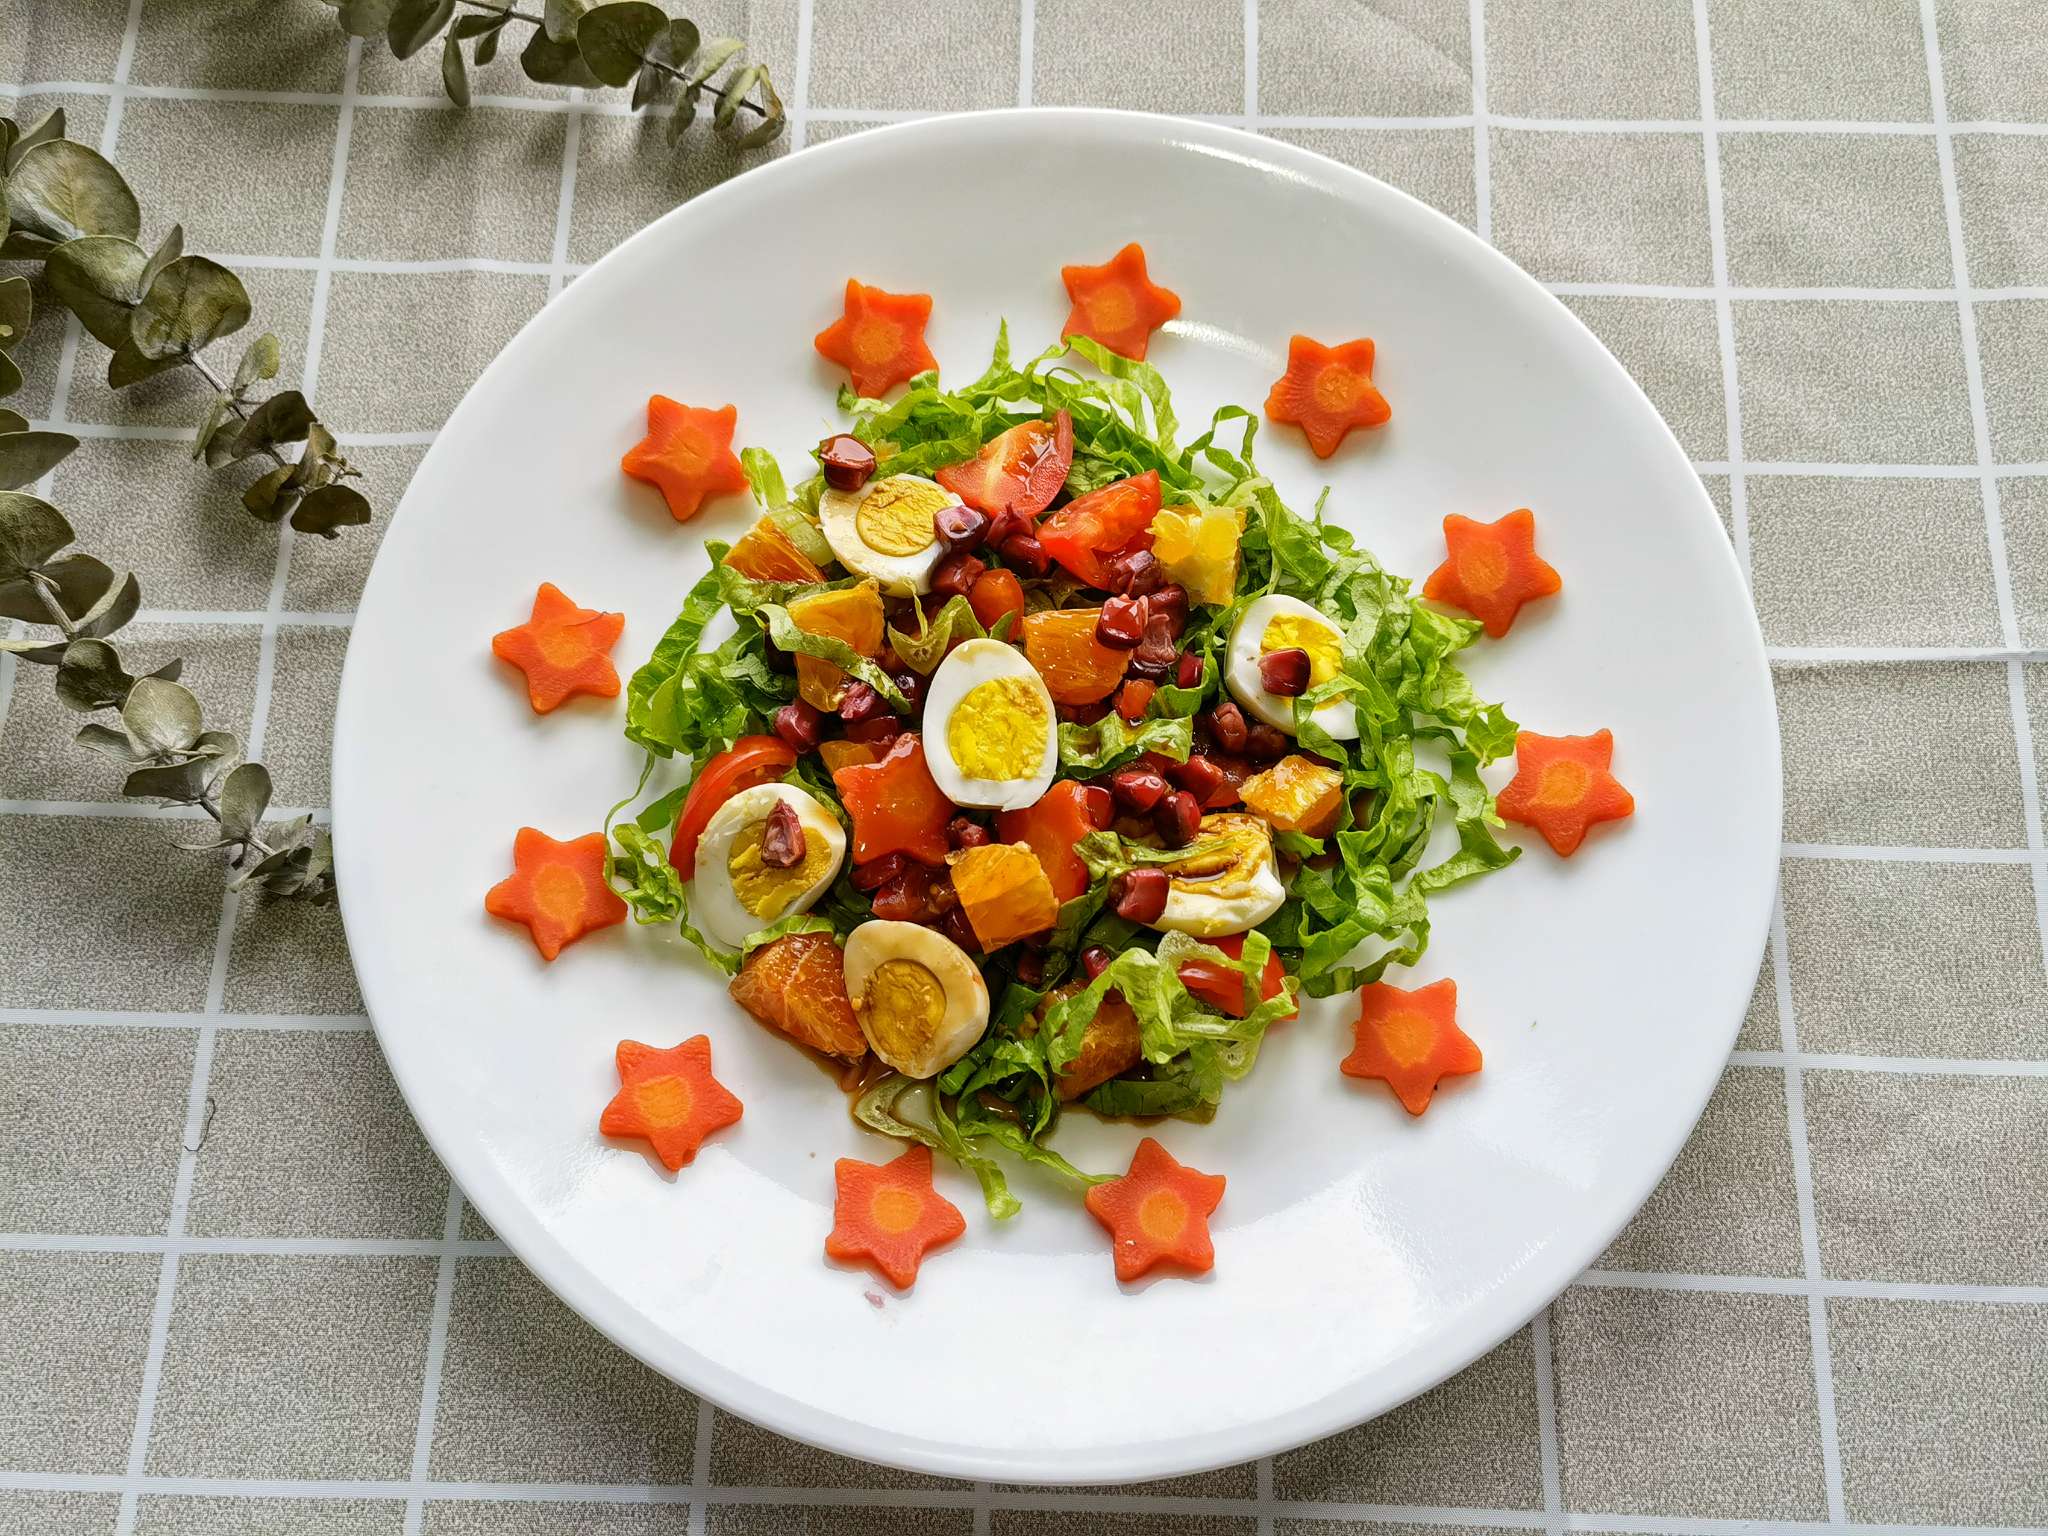 Vegetable and Fruit Salad with Vinaigrette recipe